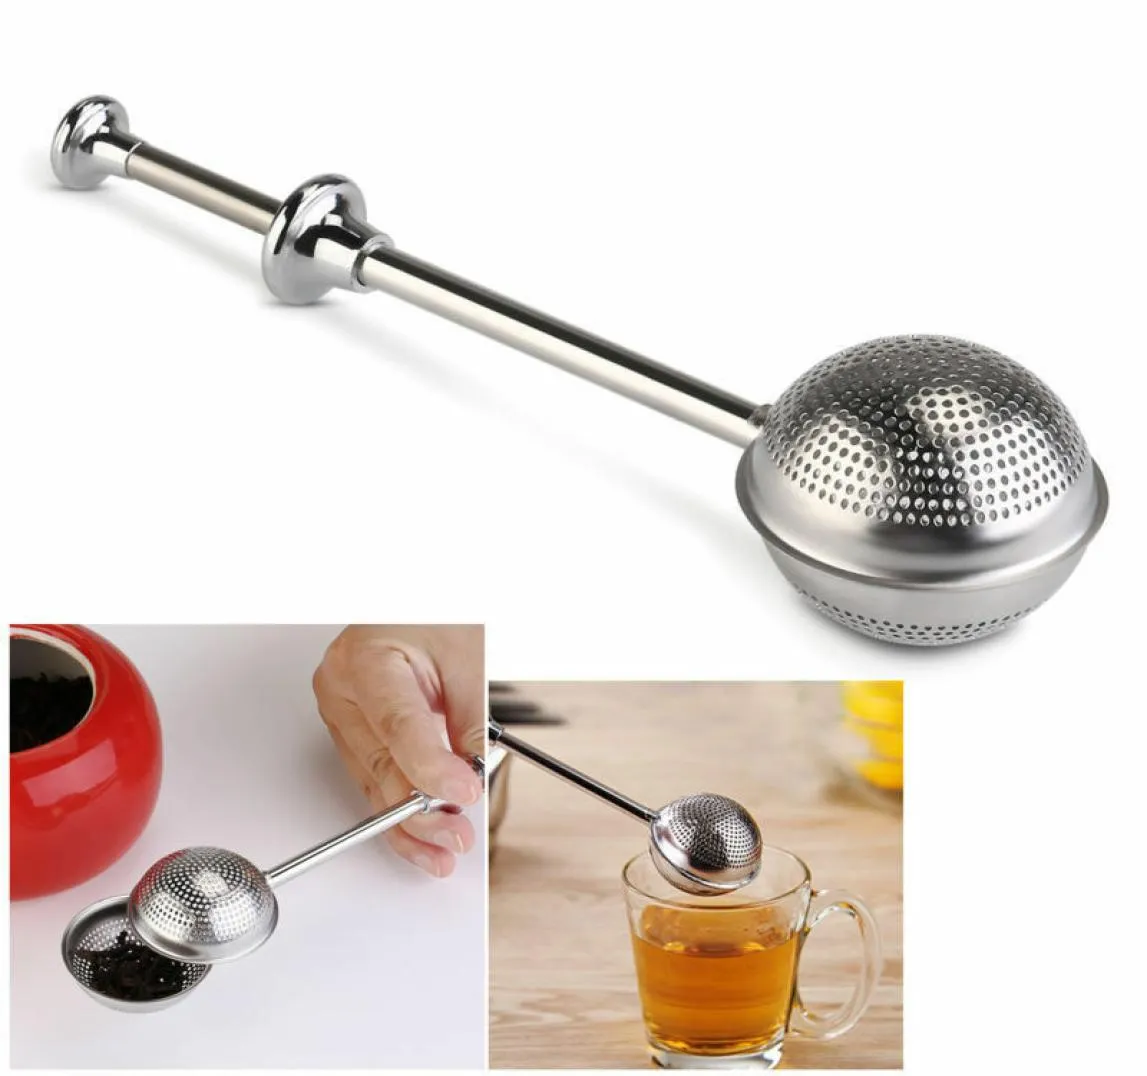 In Stock Now 50pcs 18cm Stainless Steel Spoon Retractable Ball Shape Metal Locking Spice Tea Strainer Infuser Filter Squeeze6360741